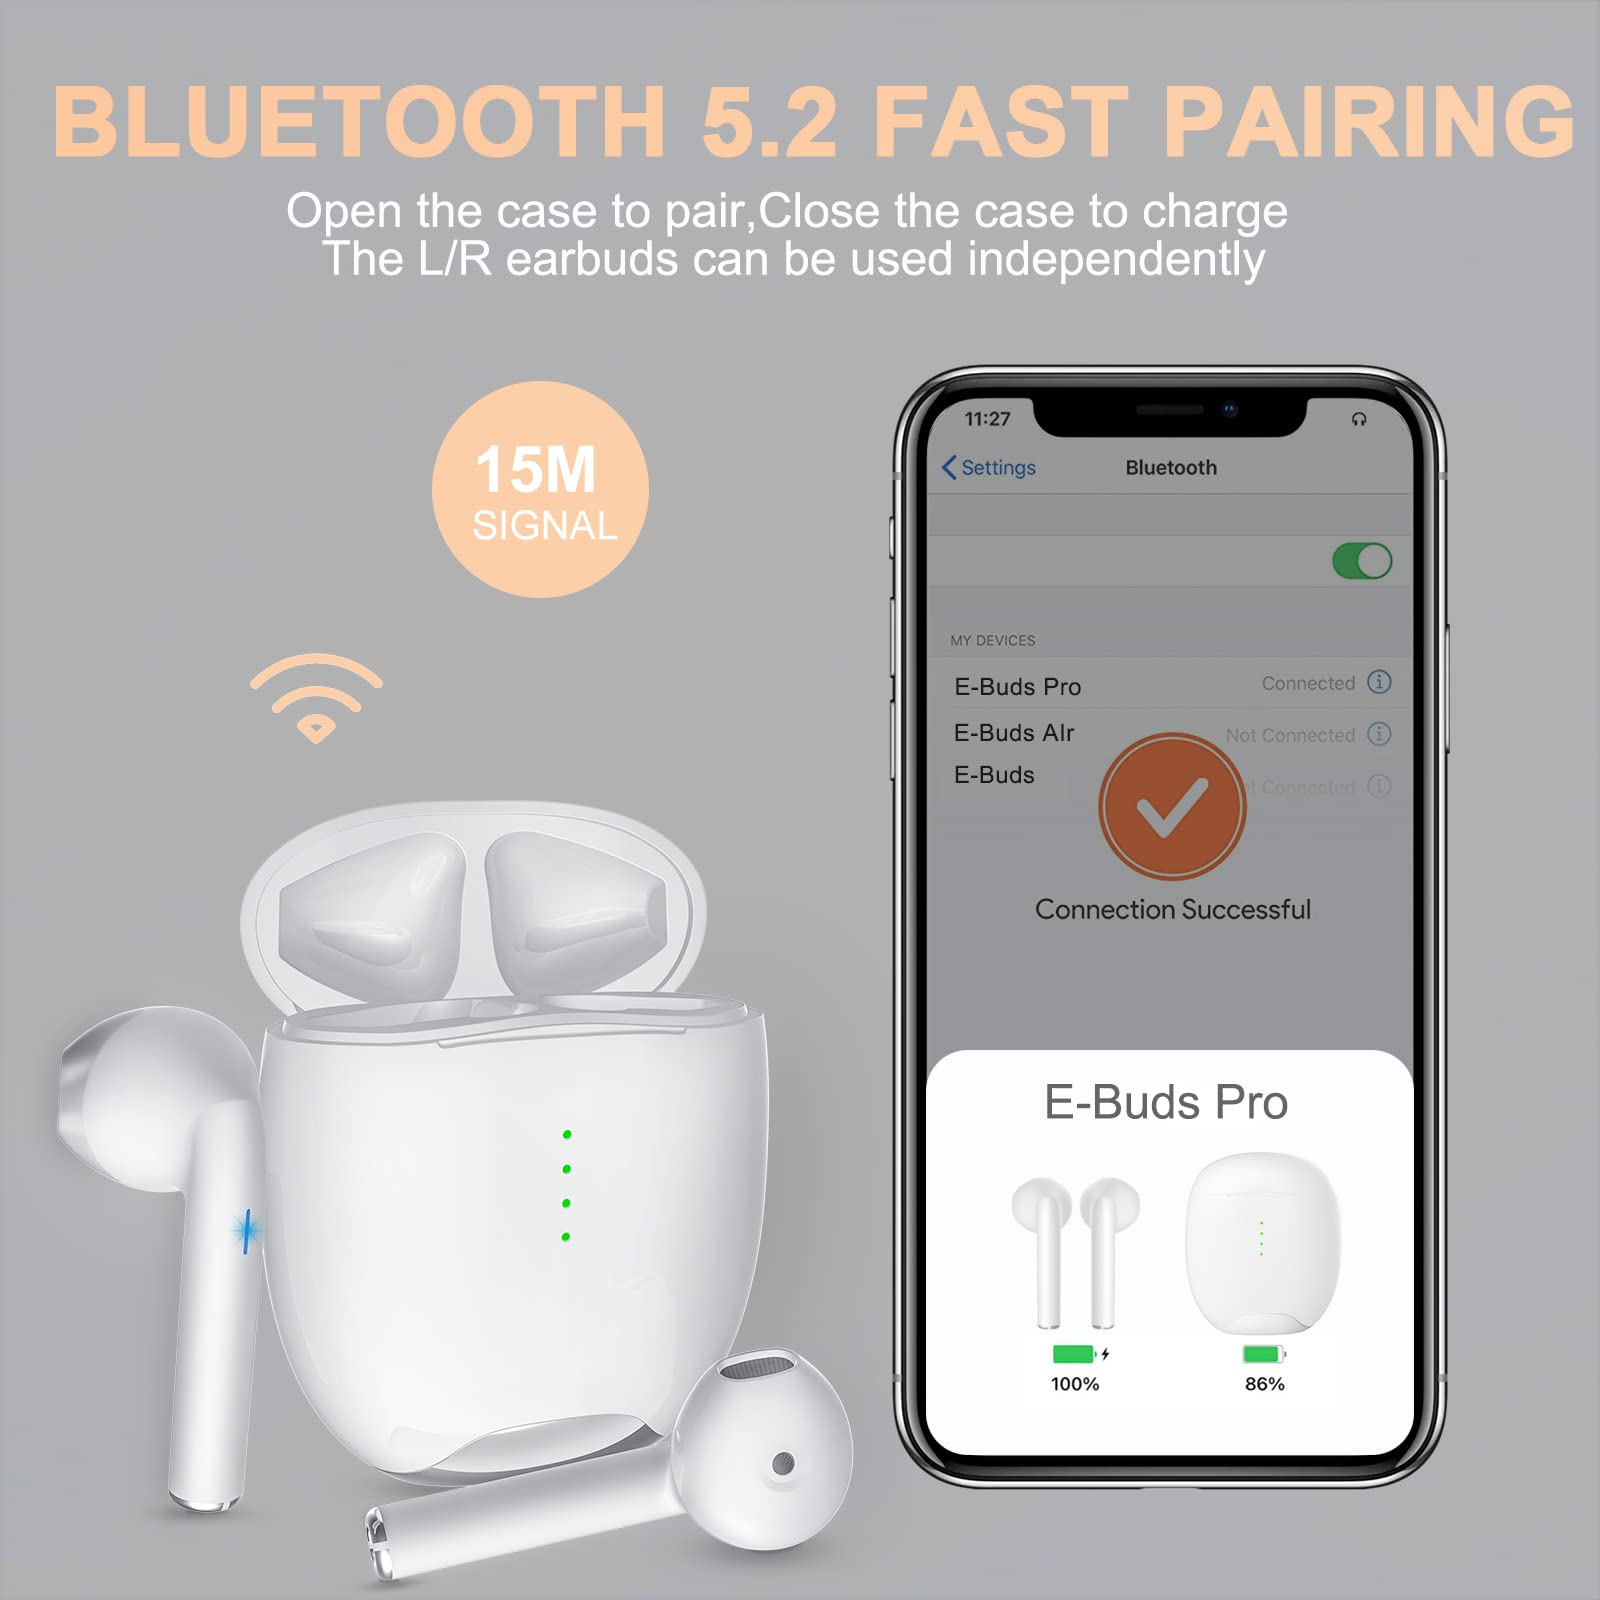 Wireless Earbuds Bluetooth 5.3 Headphones HI-FI Stereo, Wireless Earphones 42H Playtime Fast Charging,In Ear Headphones with CVC 8.0 Noise Reduction Touch Control Ear buds for Samsung iPhone Android